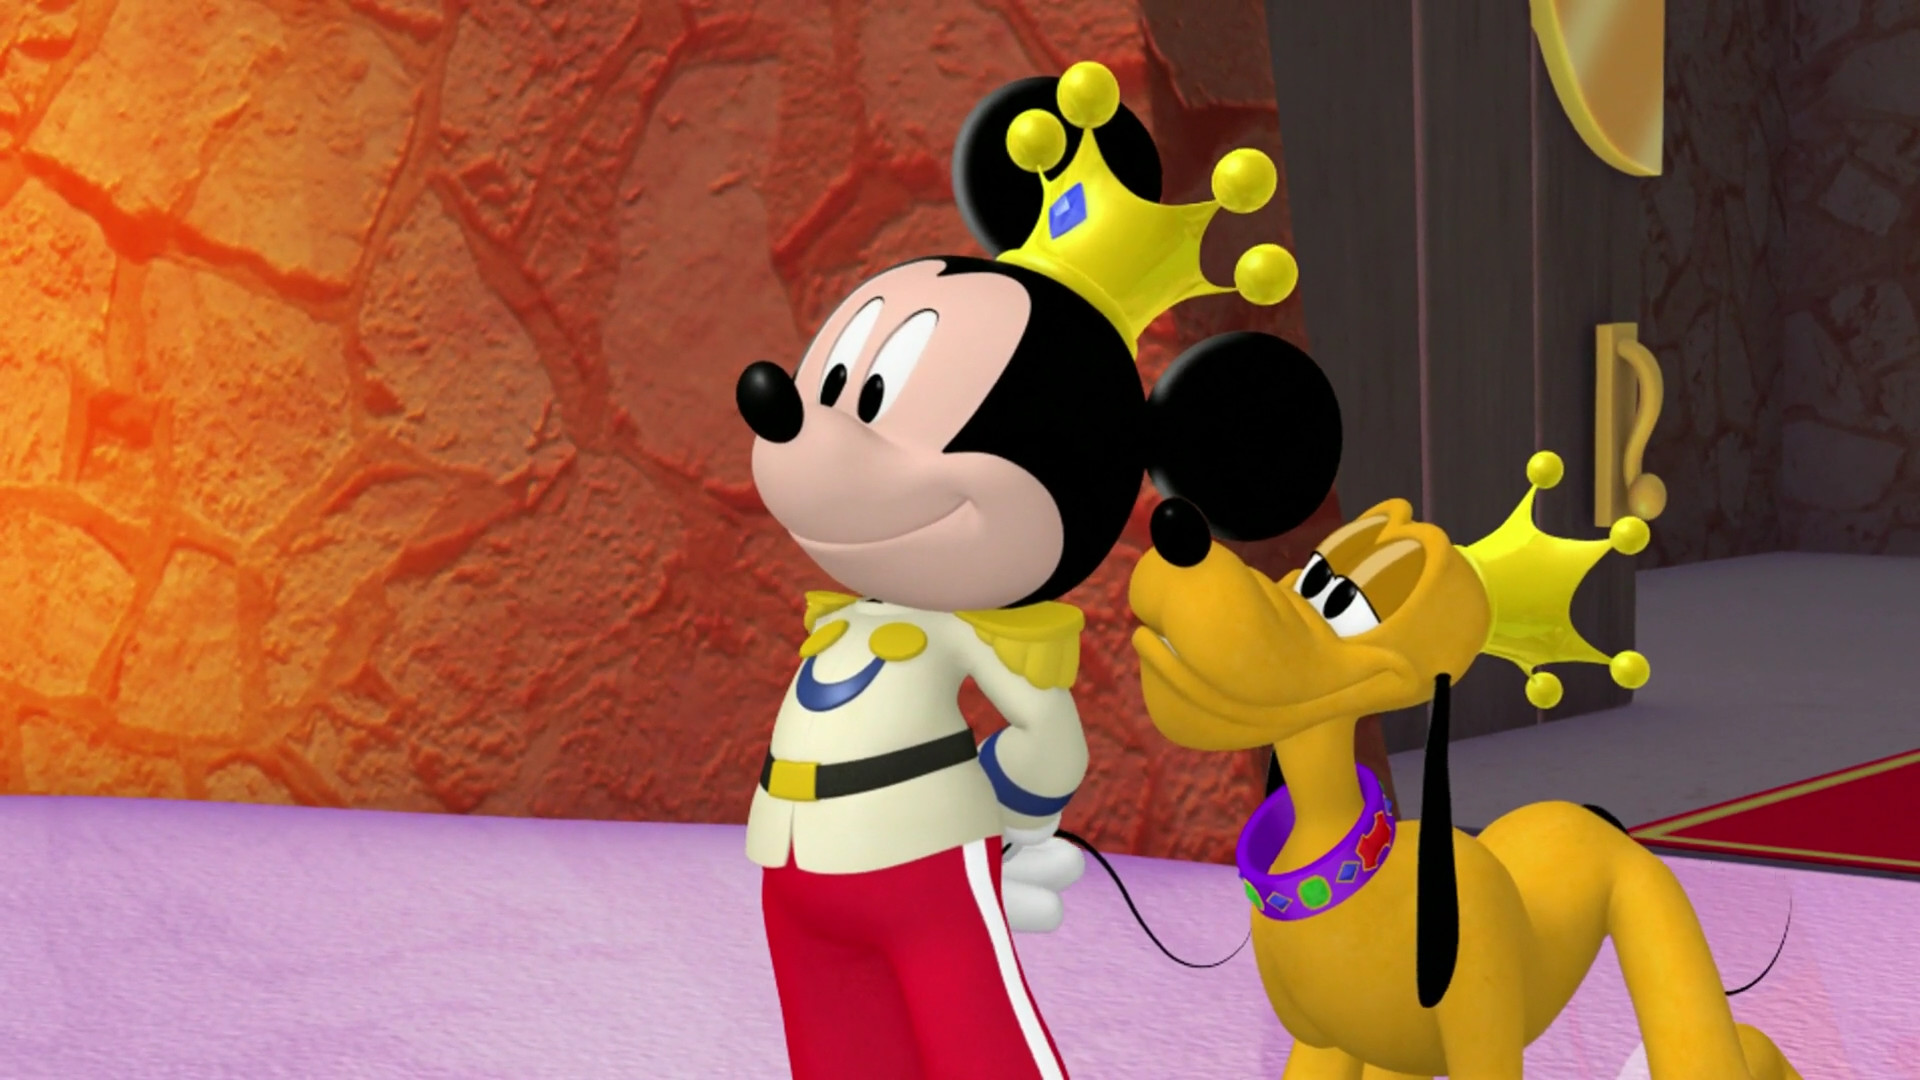 1920x1080 Mickey Mouse Clubhouse images Minnie-rella (Prince Mickey and Prince Pluto)  HD wallpaper and background photos